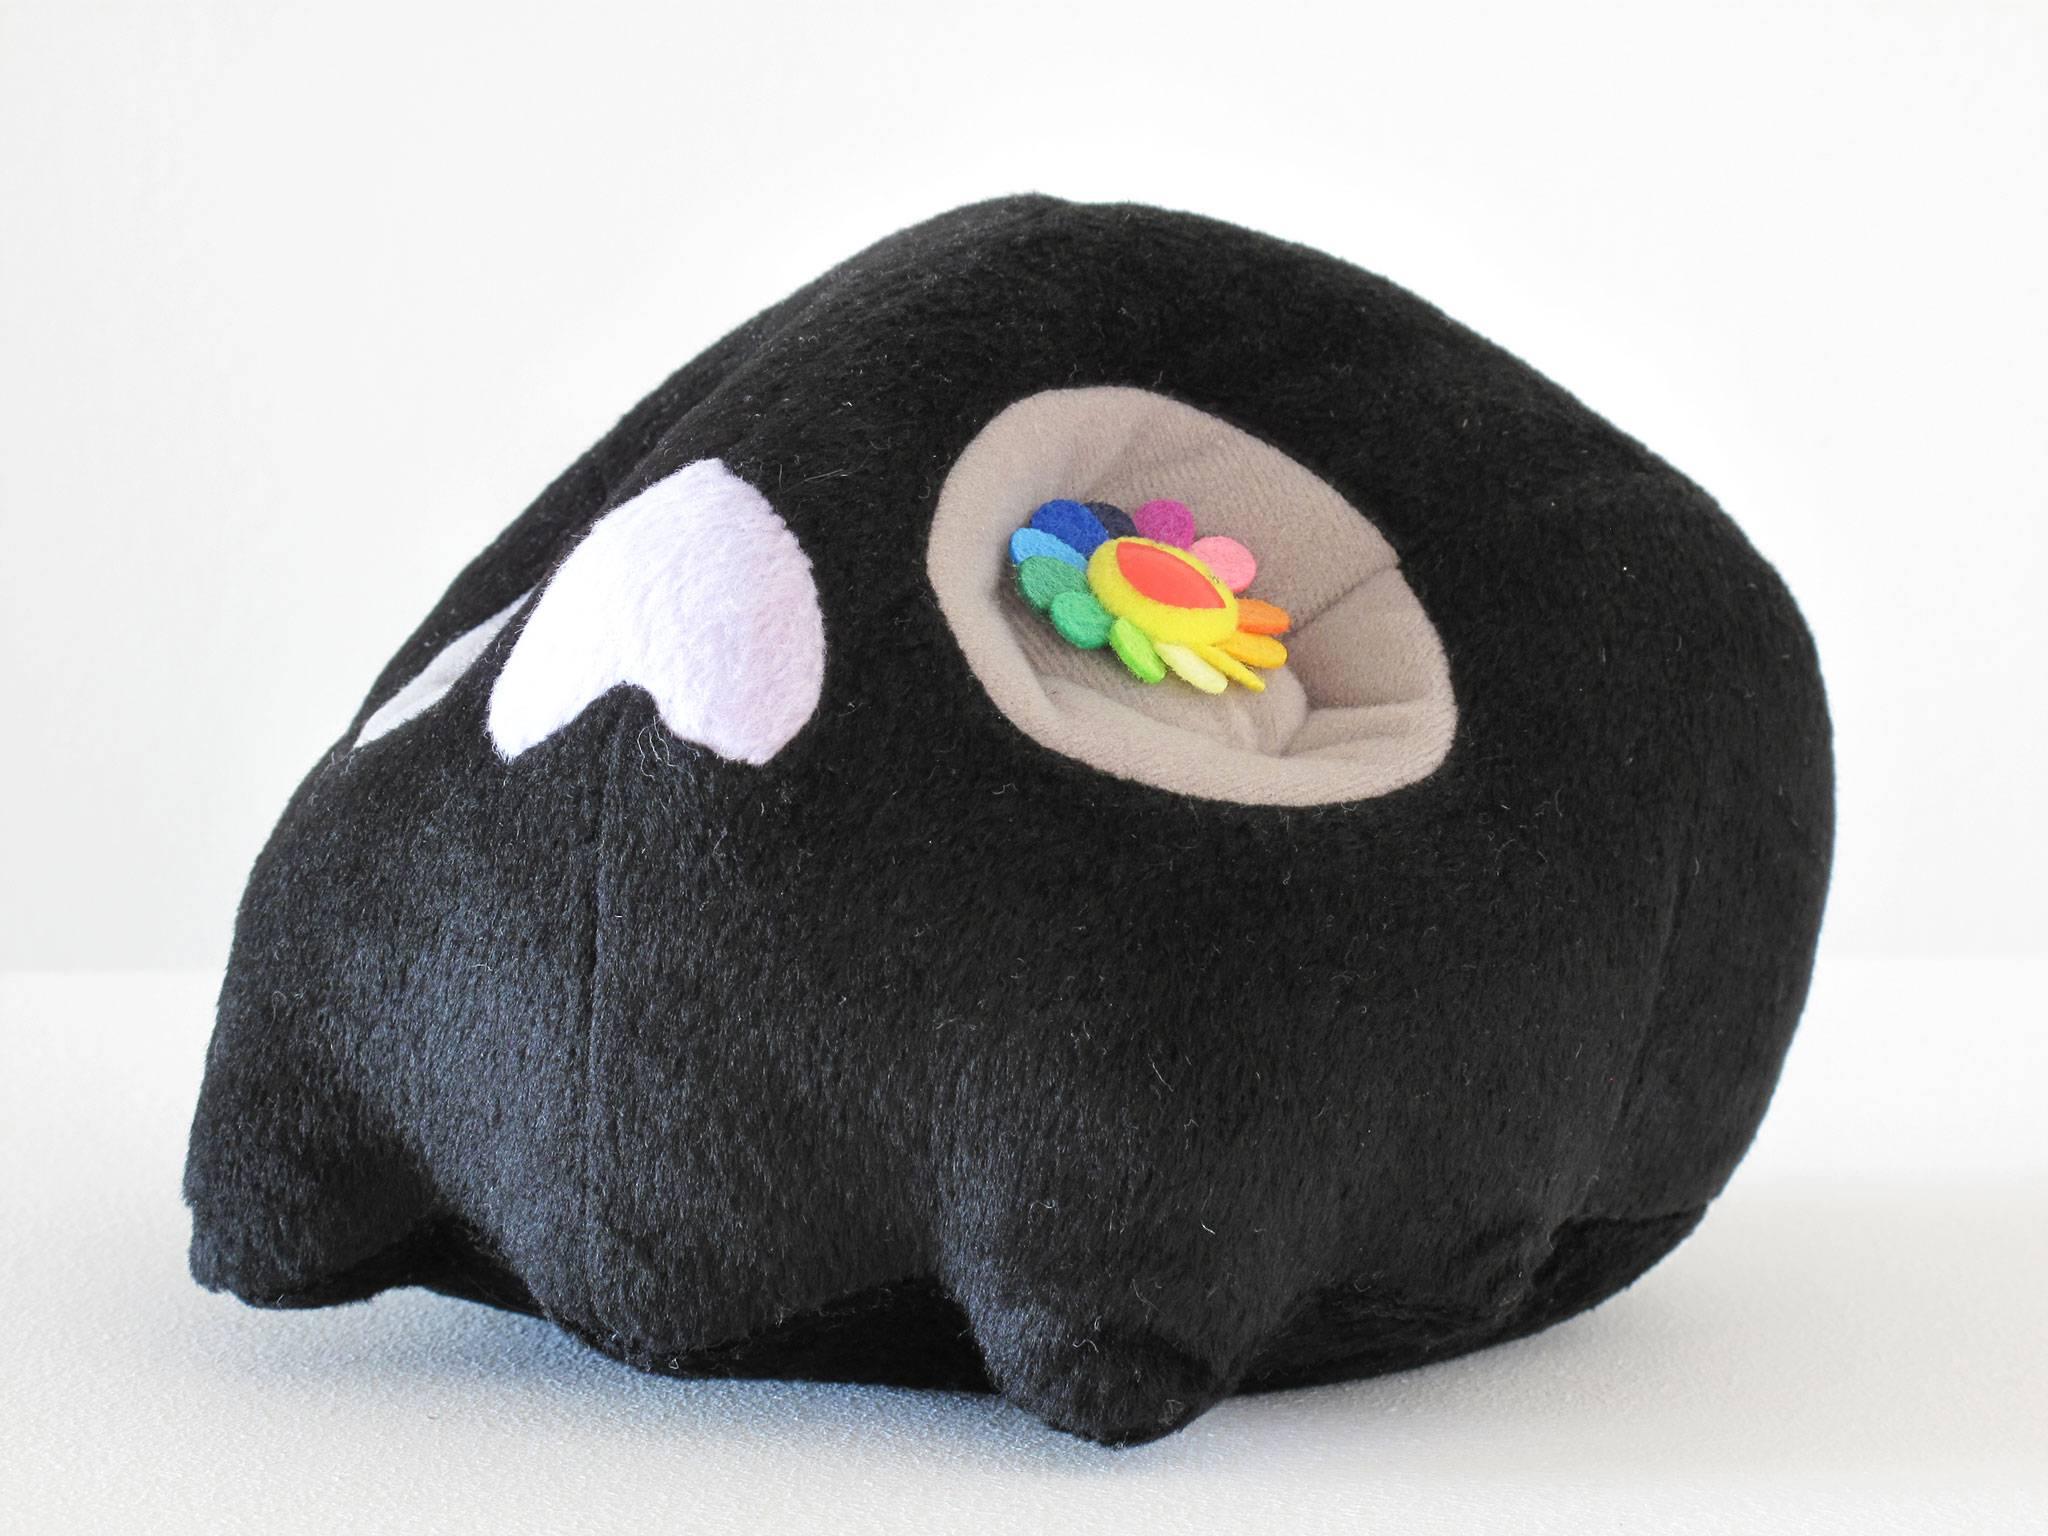 Fun, fuzzy skull by Takashi Murakami, black fantasy creature, plush toy, art doll made in Japan, acquired from Moca 'Murakami' exhibition in 2007. Dimensions: 7 high x 7 wide x 5 deep inches.